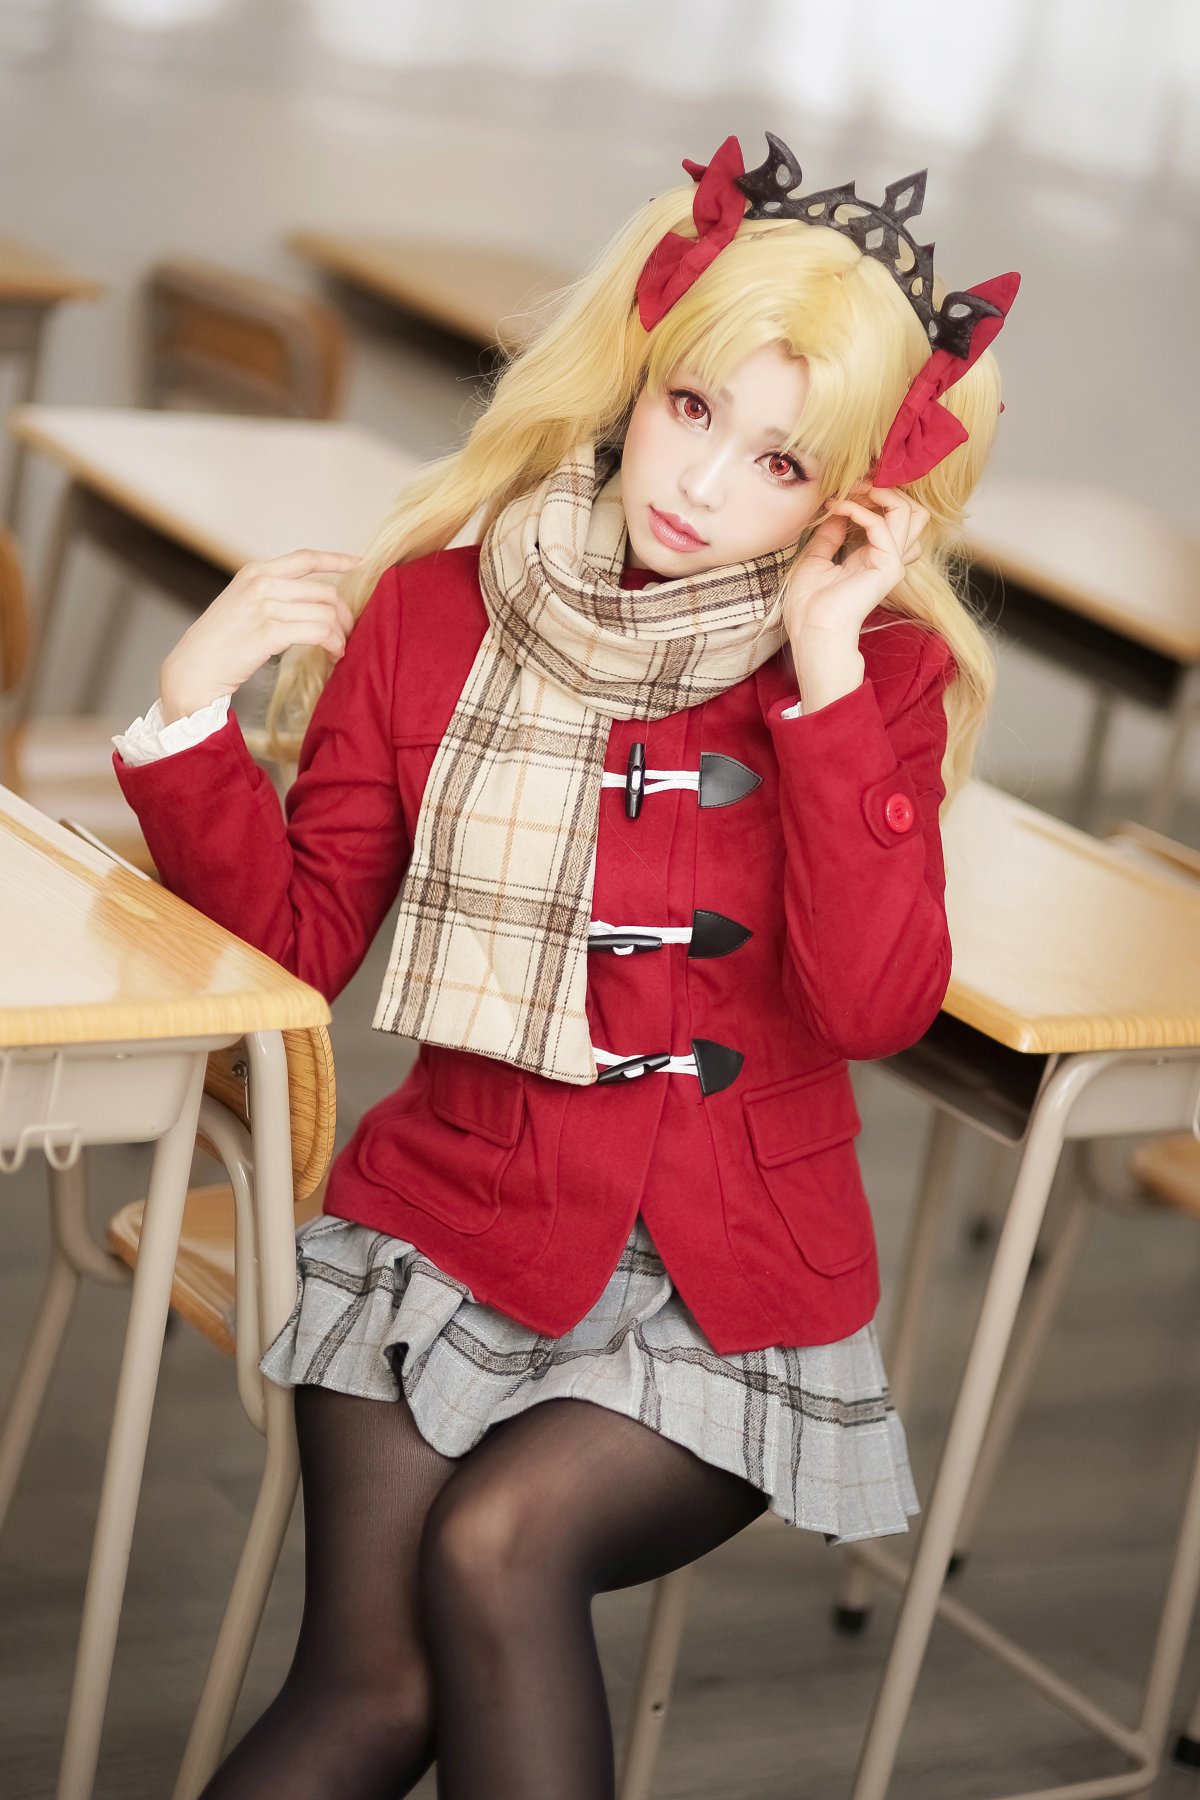 Coser@Ely Vol.022 ERE エレシュキガル 写真 A 0047